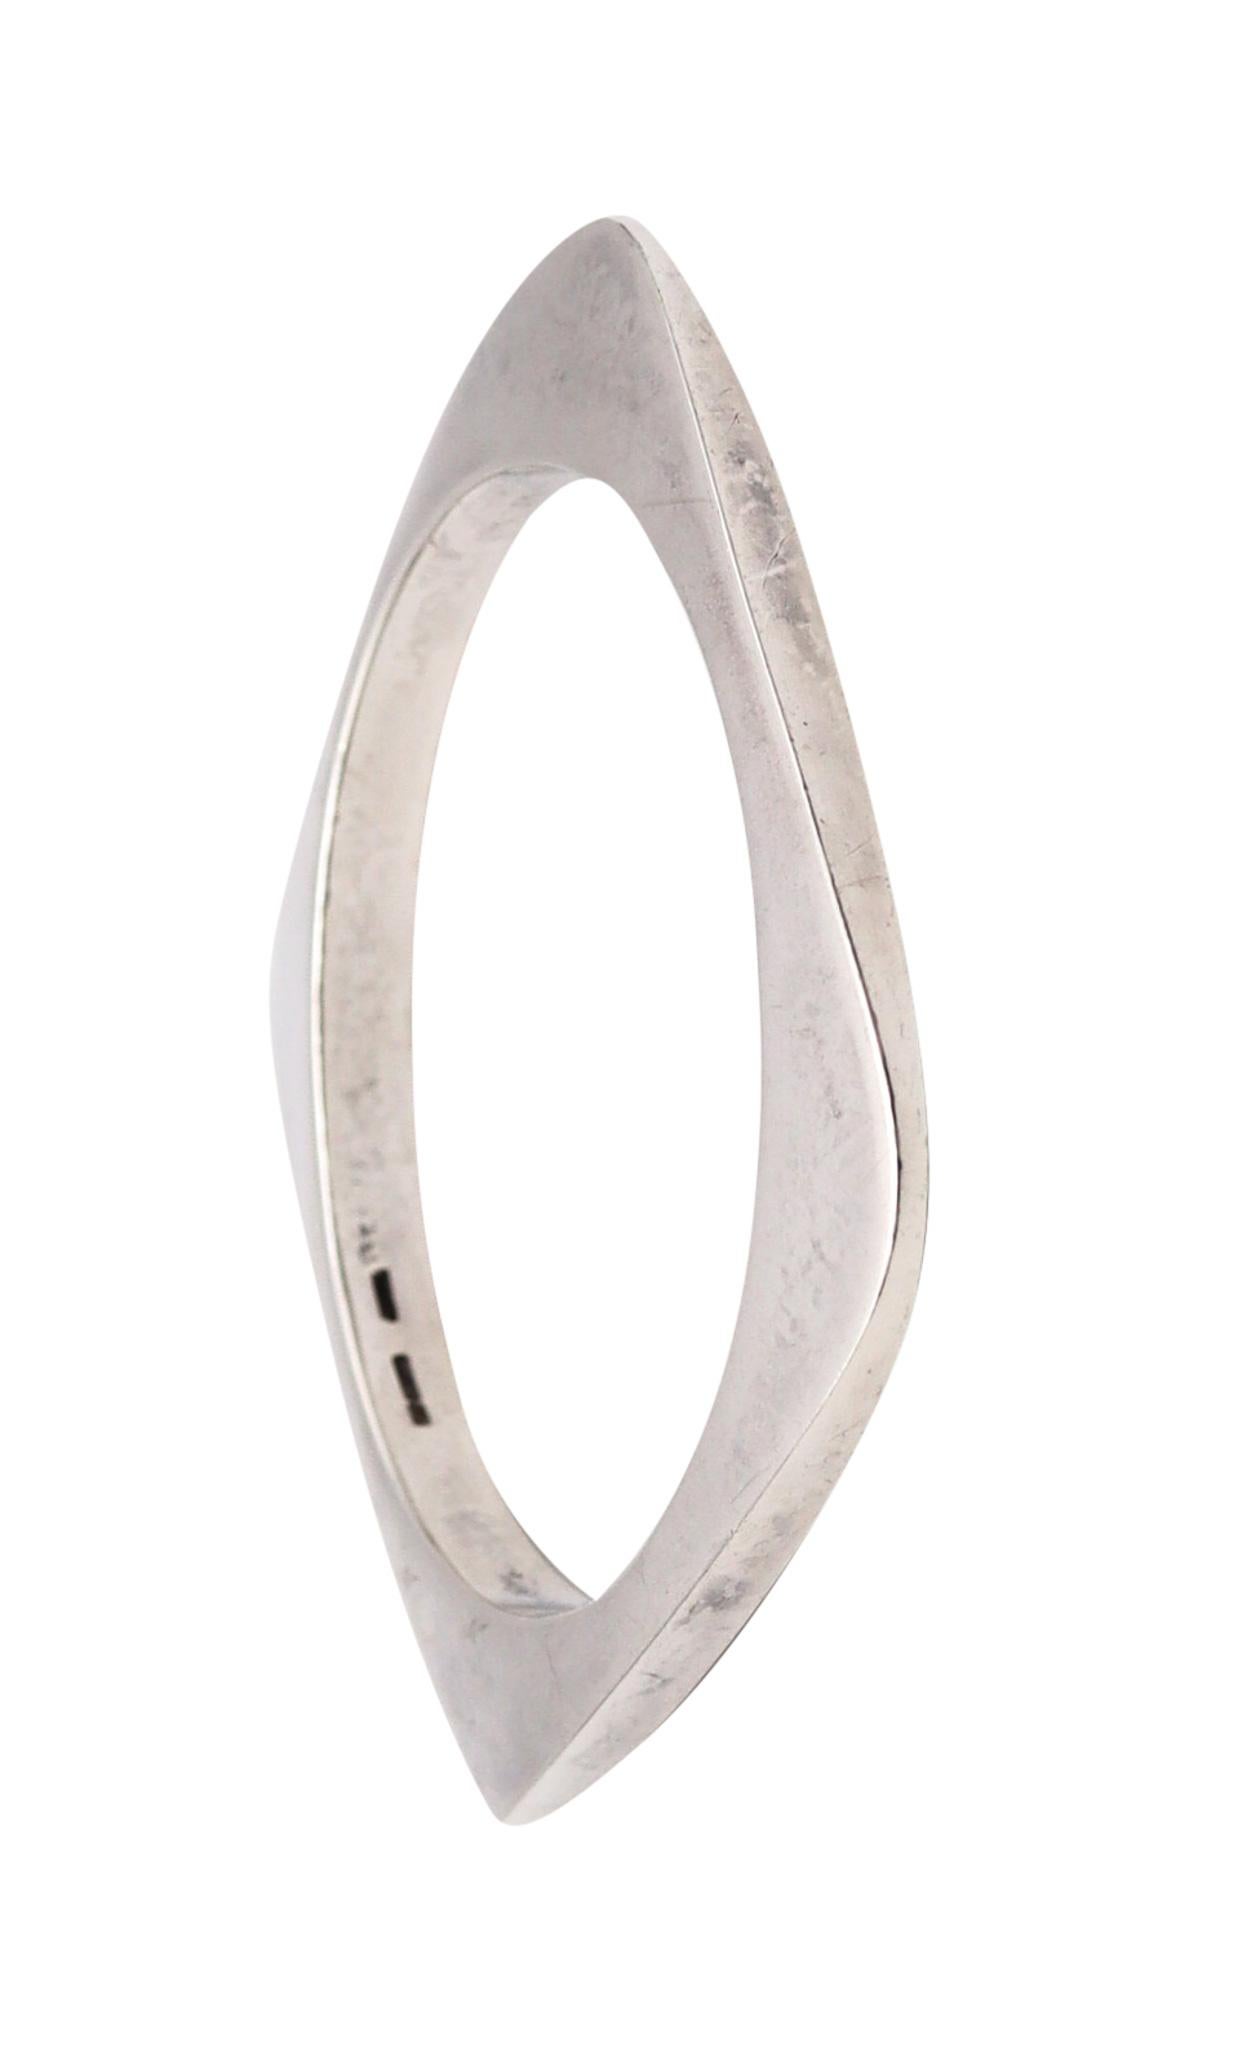 A geometric bangle bracelet.

Vintage geometric bangle, created Mexico during the modernism period back in the early 1970. This piece has been designed in a cushion shape with super sleek and geometric sharp shapes, in solid sterling silver